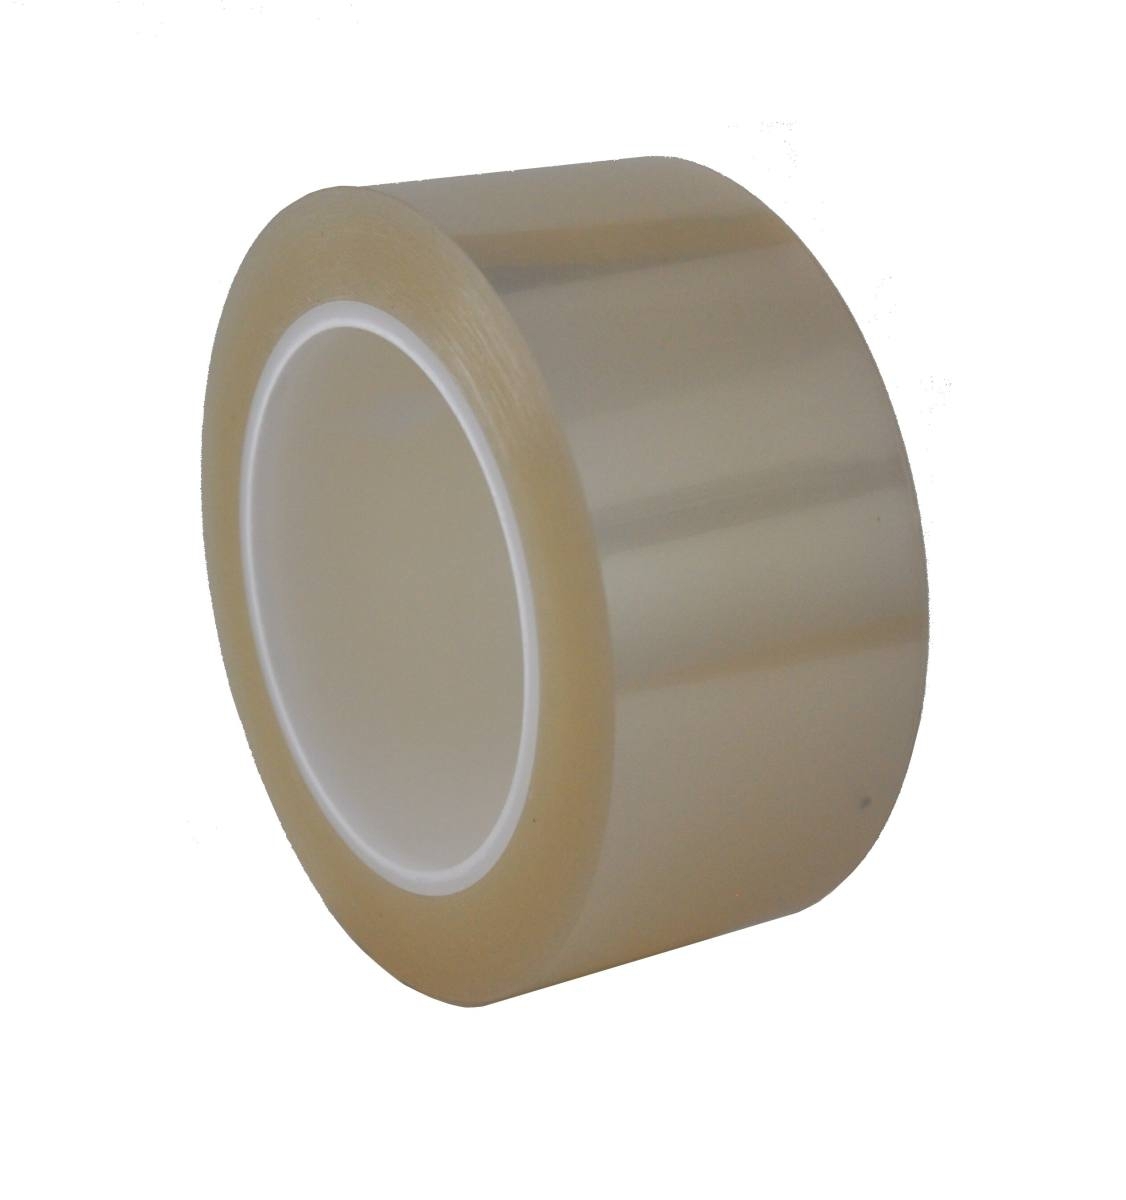 SKS fluorosilicone film, polyester film 0.075mm, 75mmx100m, coated on one side with fluorosilicone, transparent